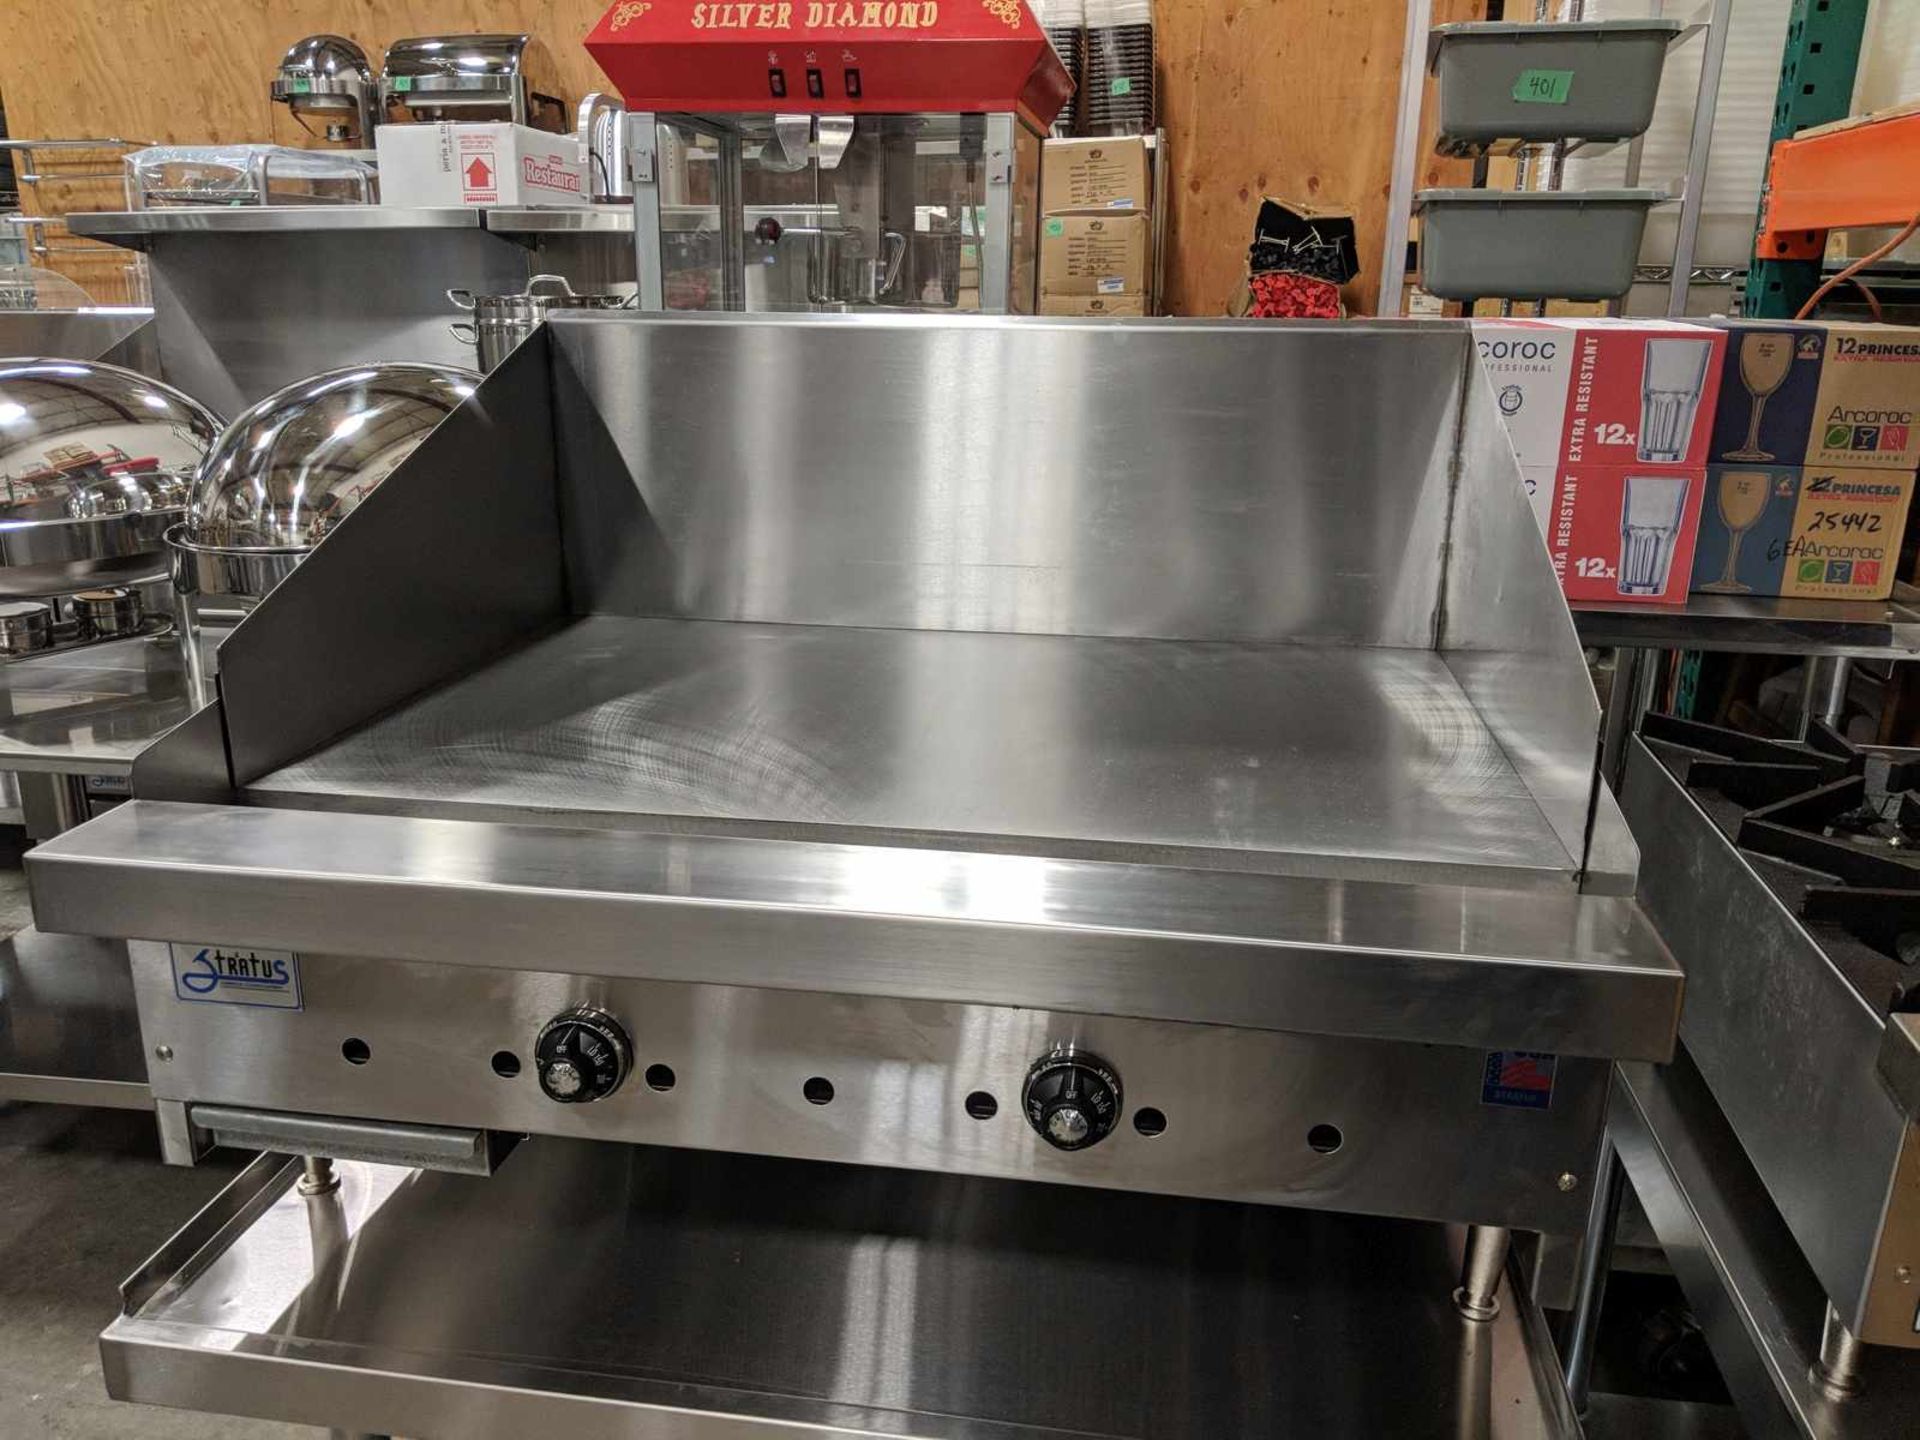 36" Propane Thermostatic Griddle with 12" Backsplash and Equip Stand, 90K BTU - Image 3 of 5